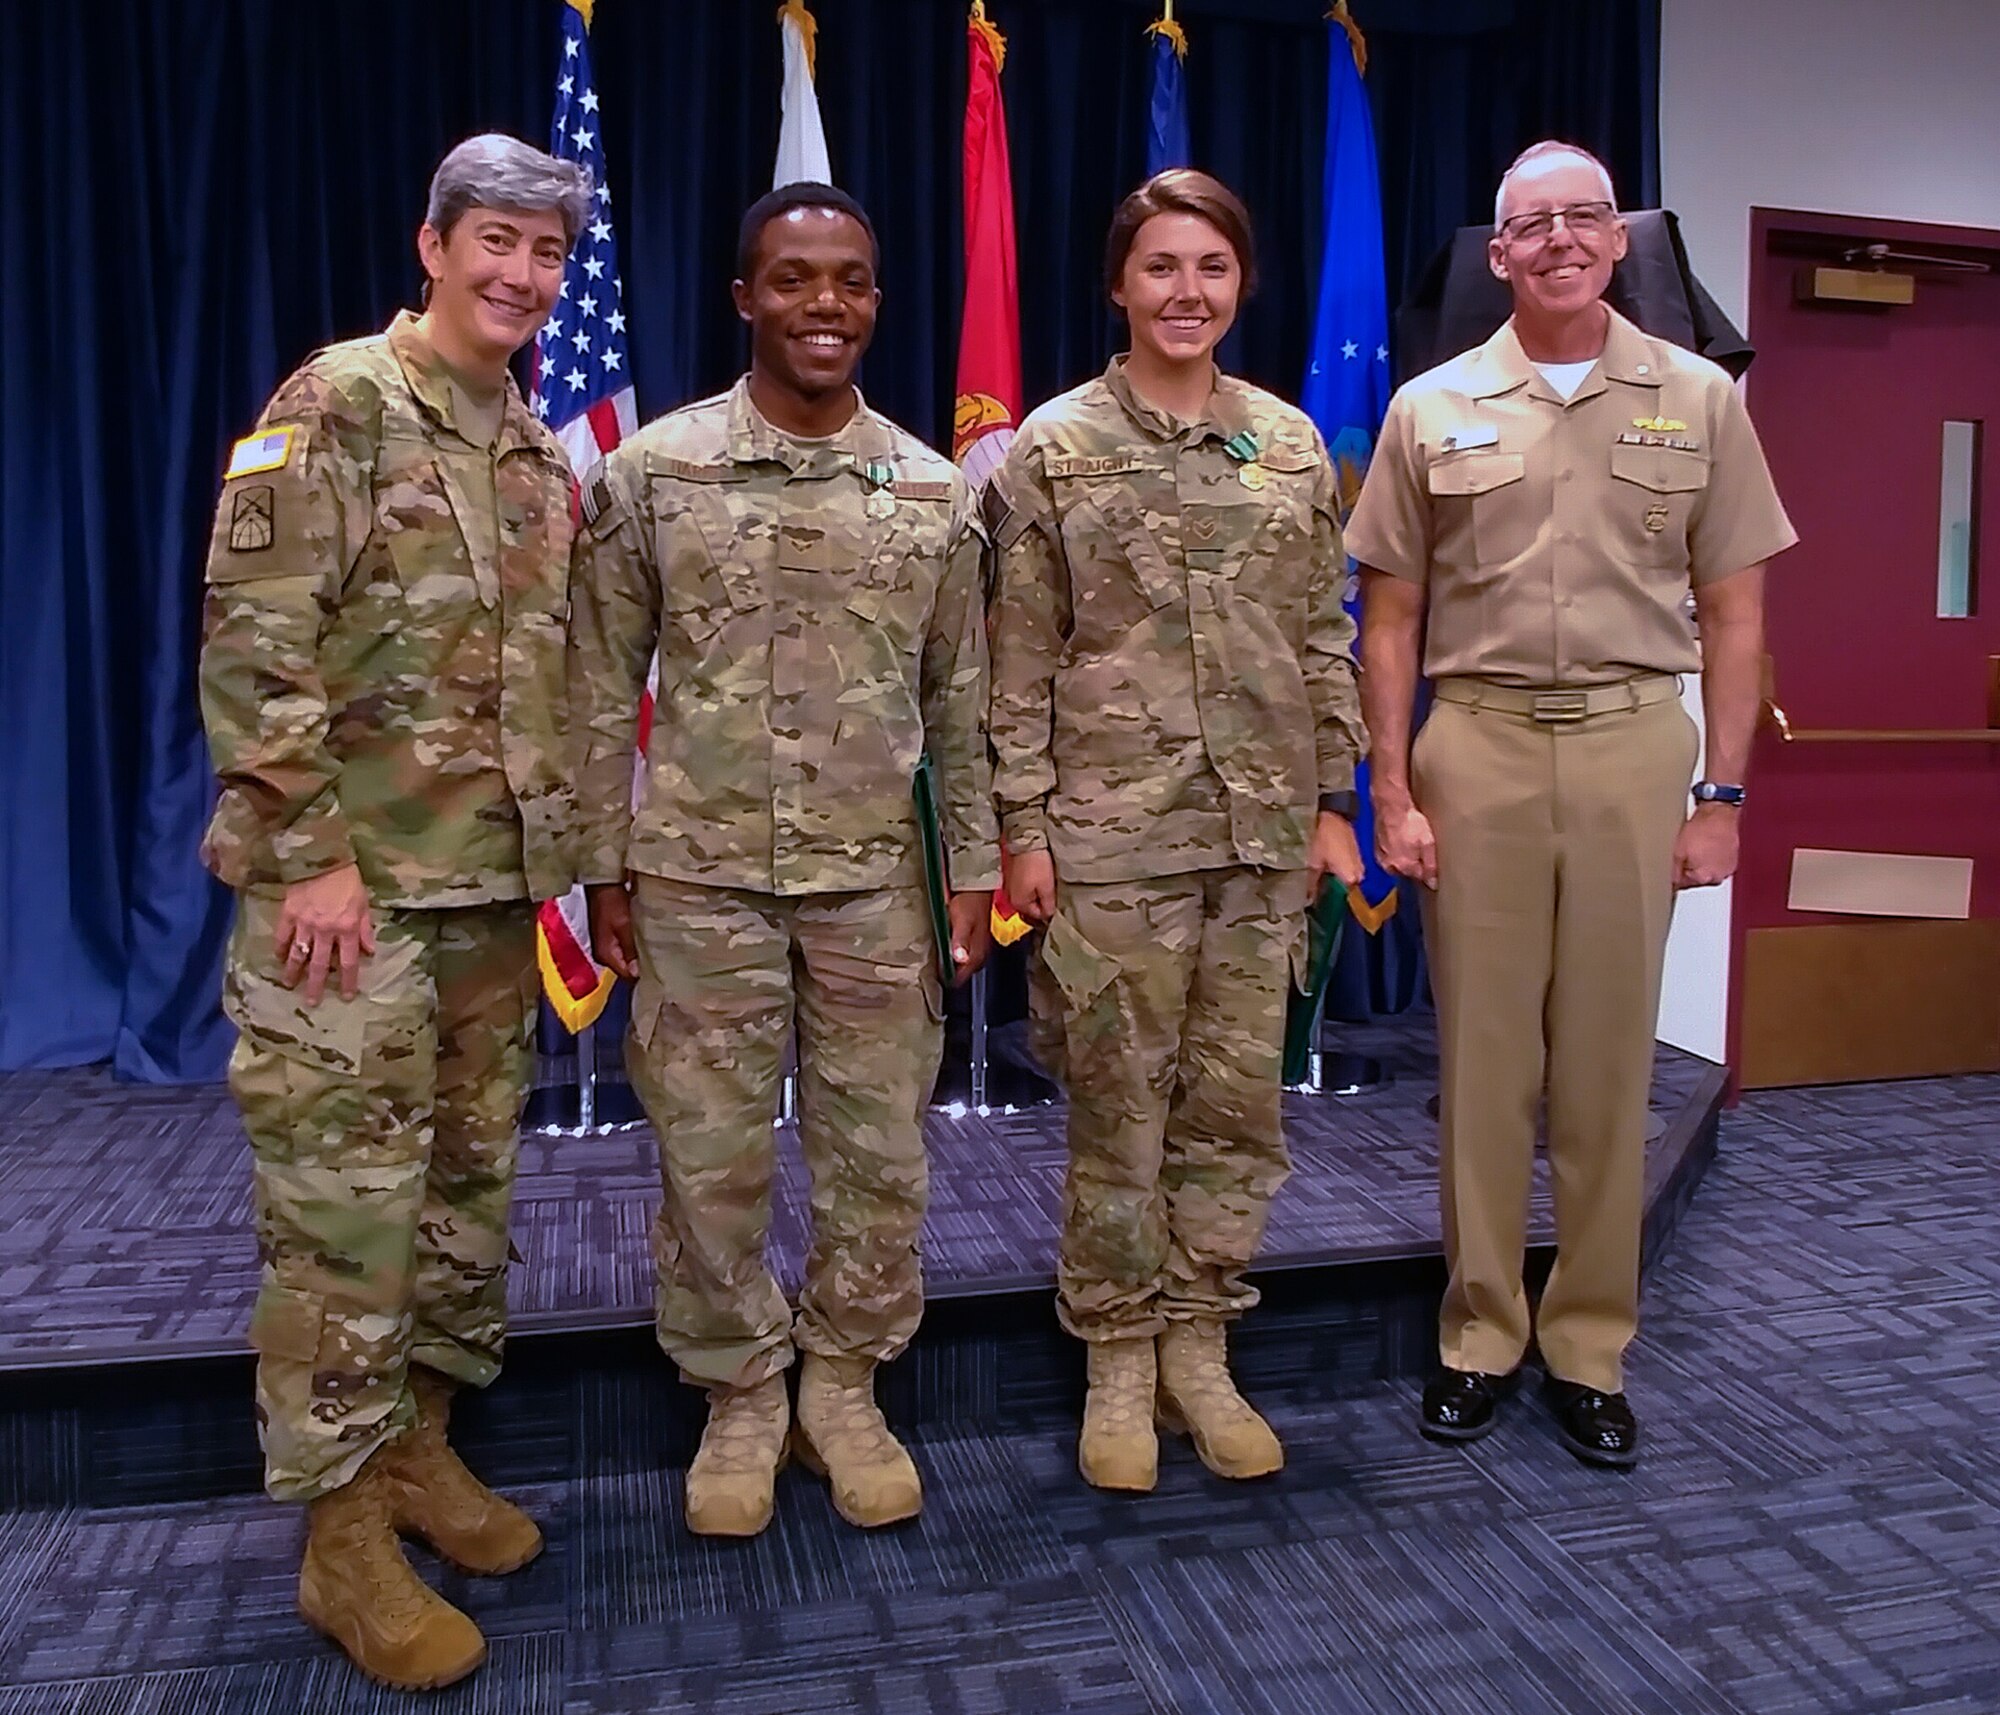 Senior Airman Maygan Straight and Airman 1st Class Franklin Harris, both assigned to 1st Combat Camera Squadron, are congratulated by Army Col. Karen J. Roe, 21st Signal Brigade commander, and Navy Cmdr. Thomas H. Cotton, Defense Media Activity Joint Combat Camera program manager, after being announced as winners of the 2018 SPC Hilda I. Clayton Best Combat Camera Competition during an award ceremony at Ft. George G. Meade, Md., May 4, 2018. The competition is an annual event open to all branches of the military, it's hosted by the 55th Signal Company (Combat Camera) in order to test the technical and tactical proficiencies of Defense Department combat photographers. (U.S. Air Force photo by Maj. Zach Anderson)